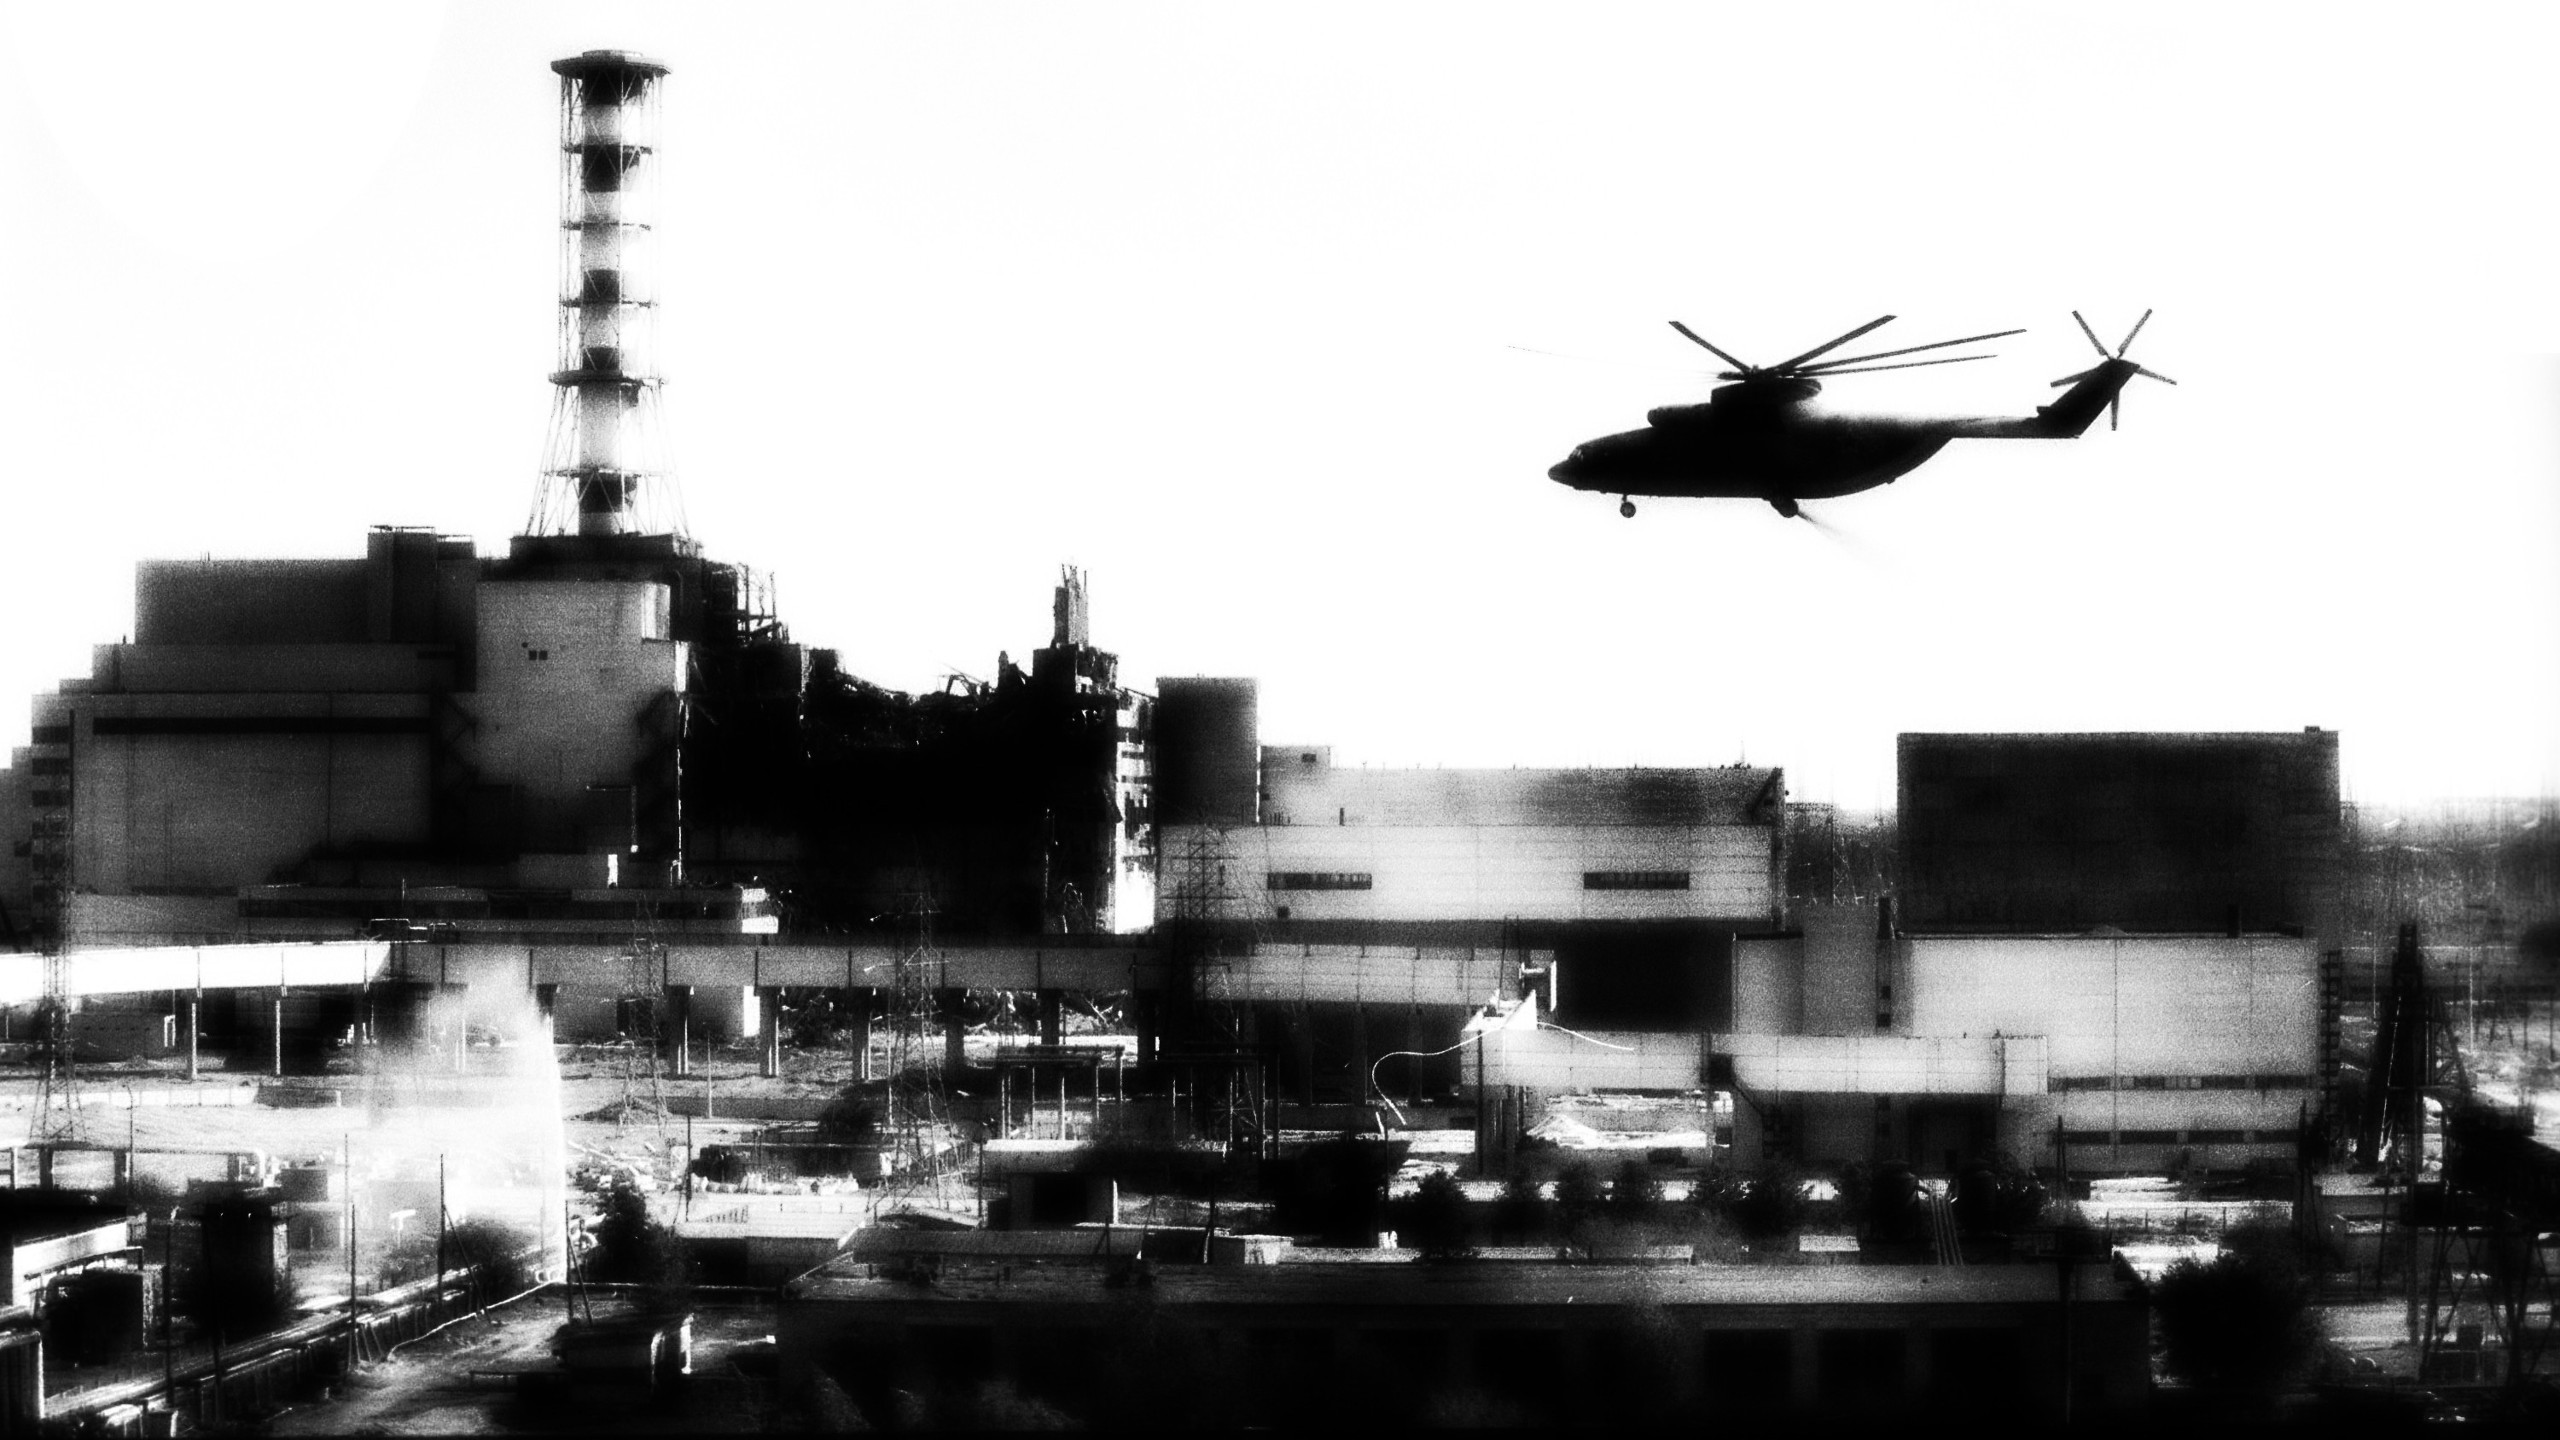 General 2560x1440 military aircraft military aircraft helicopters Chernobyl monochrome vehicle ruins Ukraine Mil Mi-26